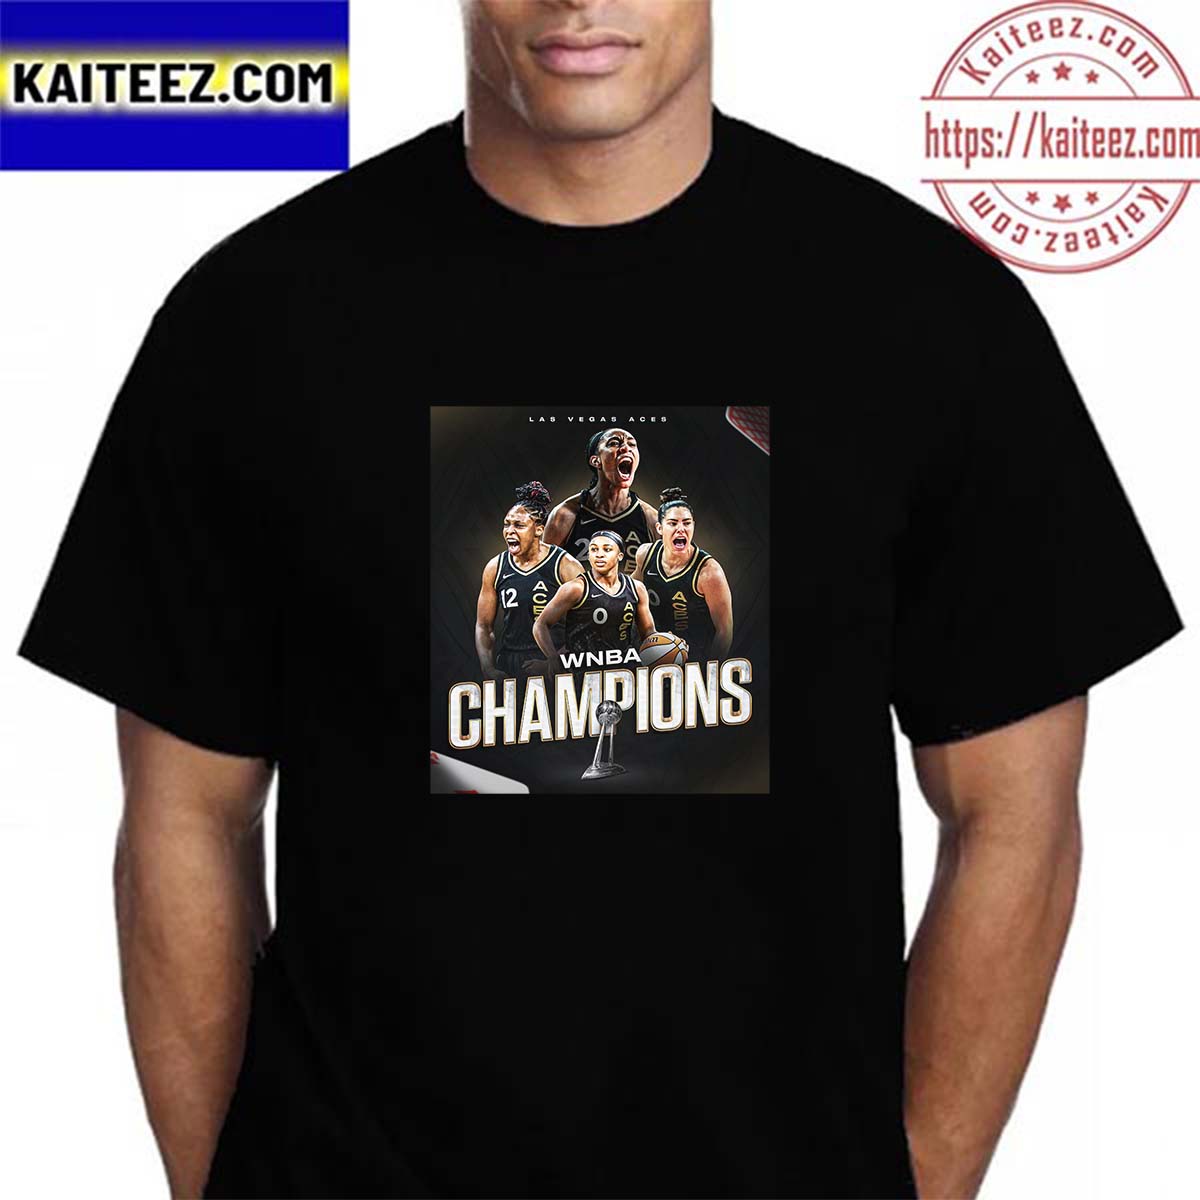 Las Vegas City Of Champions NHL Stanley Cup And WNBA Champions Shirt -  Bring Your Ideas, Thoughts And Imaginations Into Reality Today